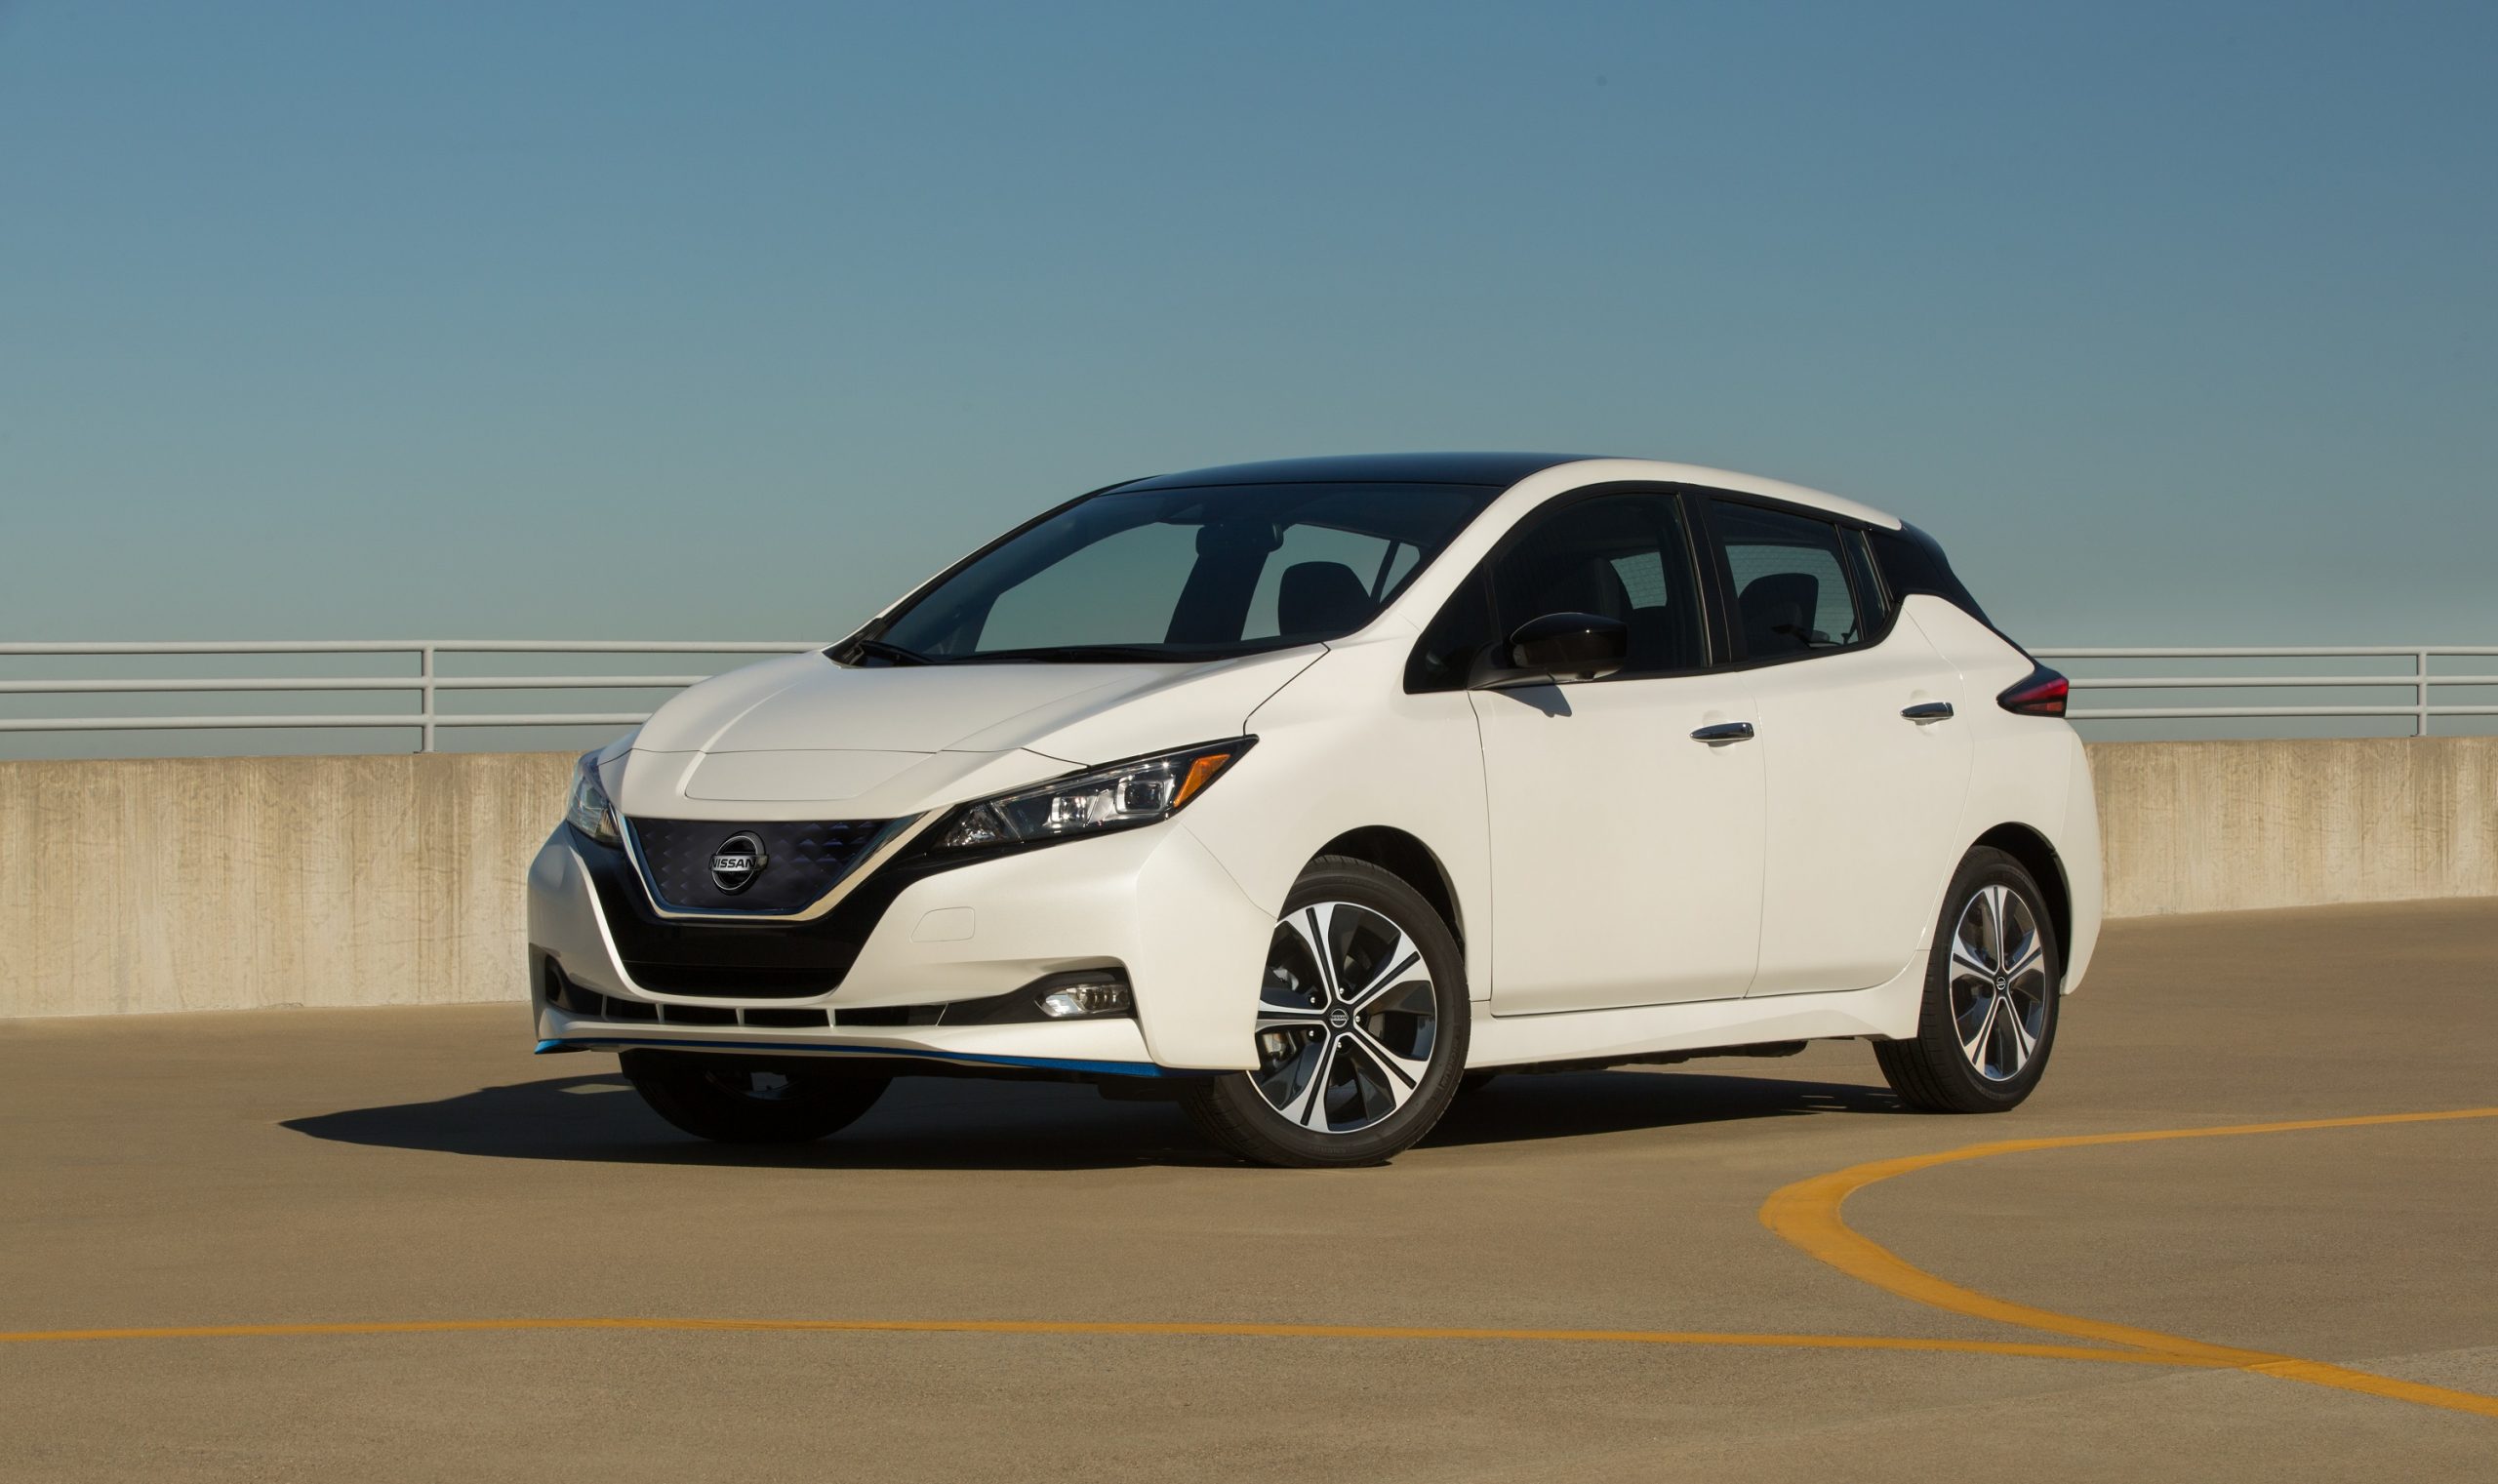 The Nissan Leaf, one of the best EV new cars on the market, shot from the front 3/4